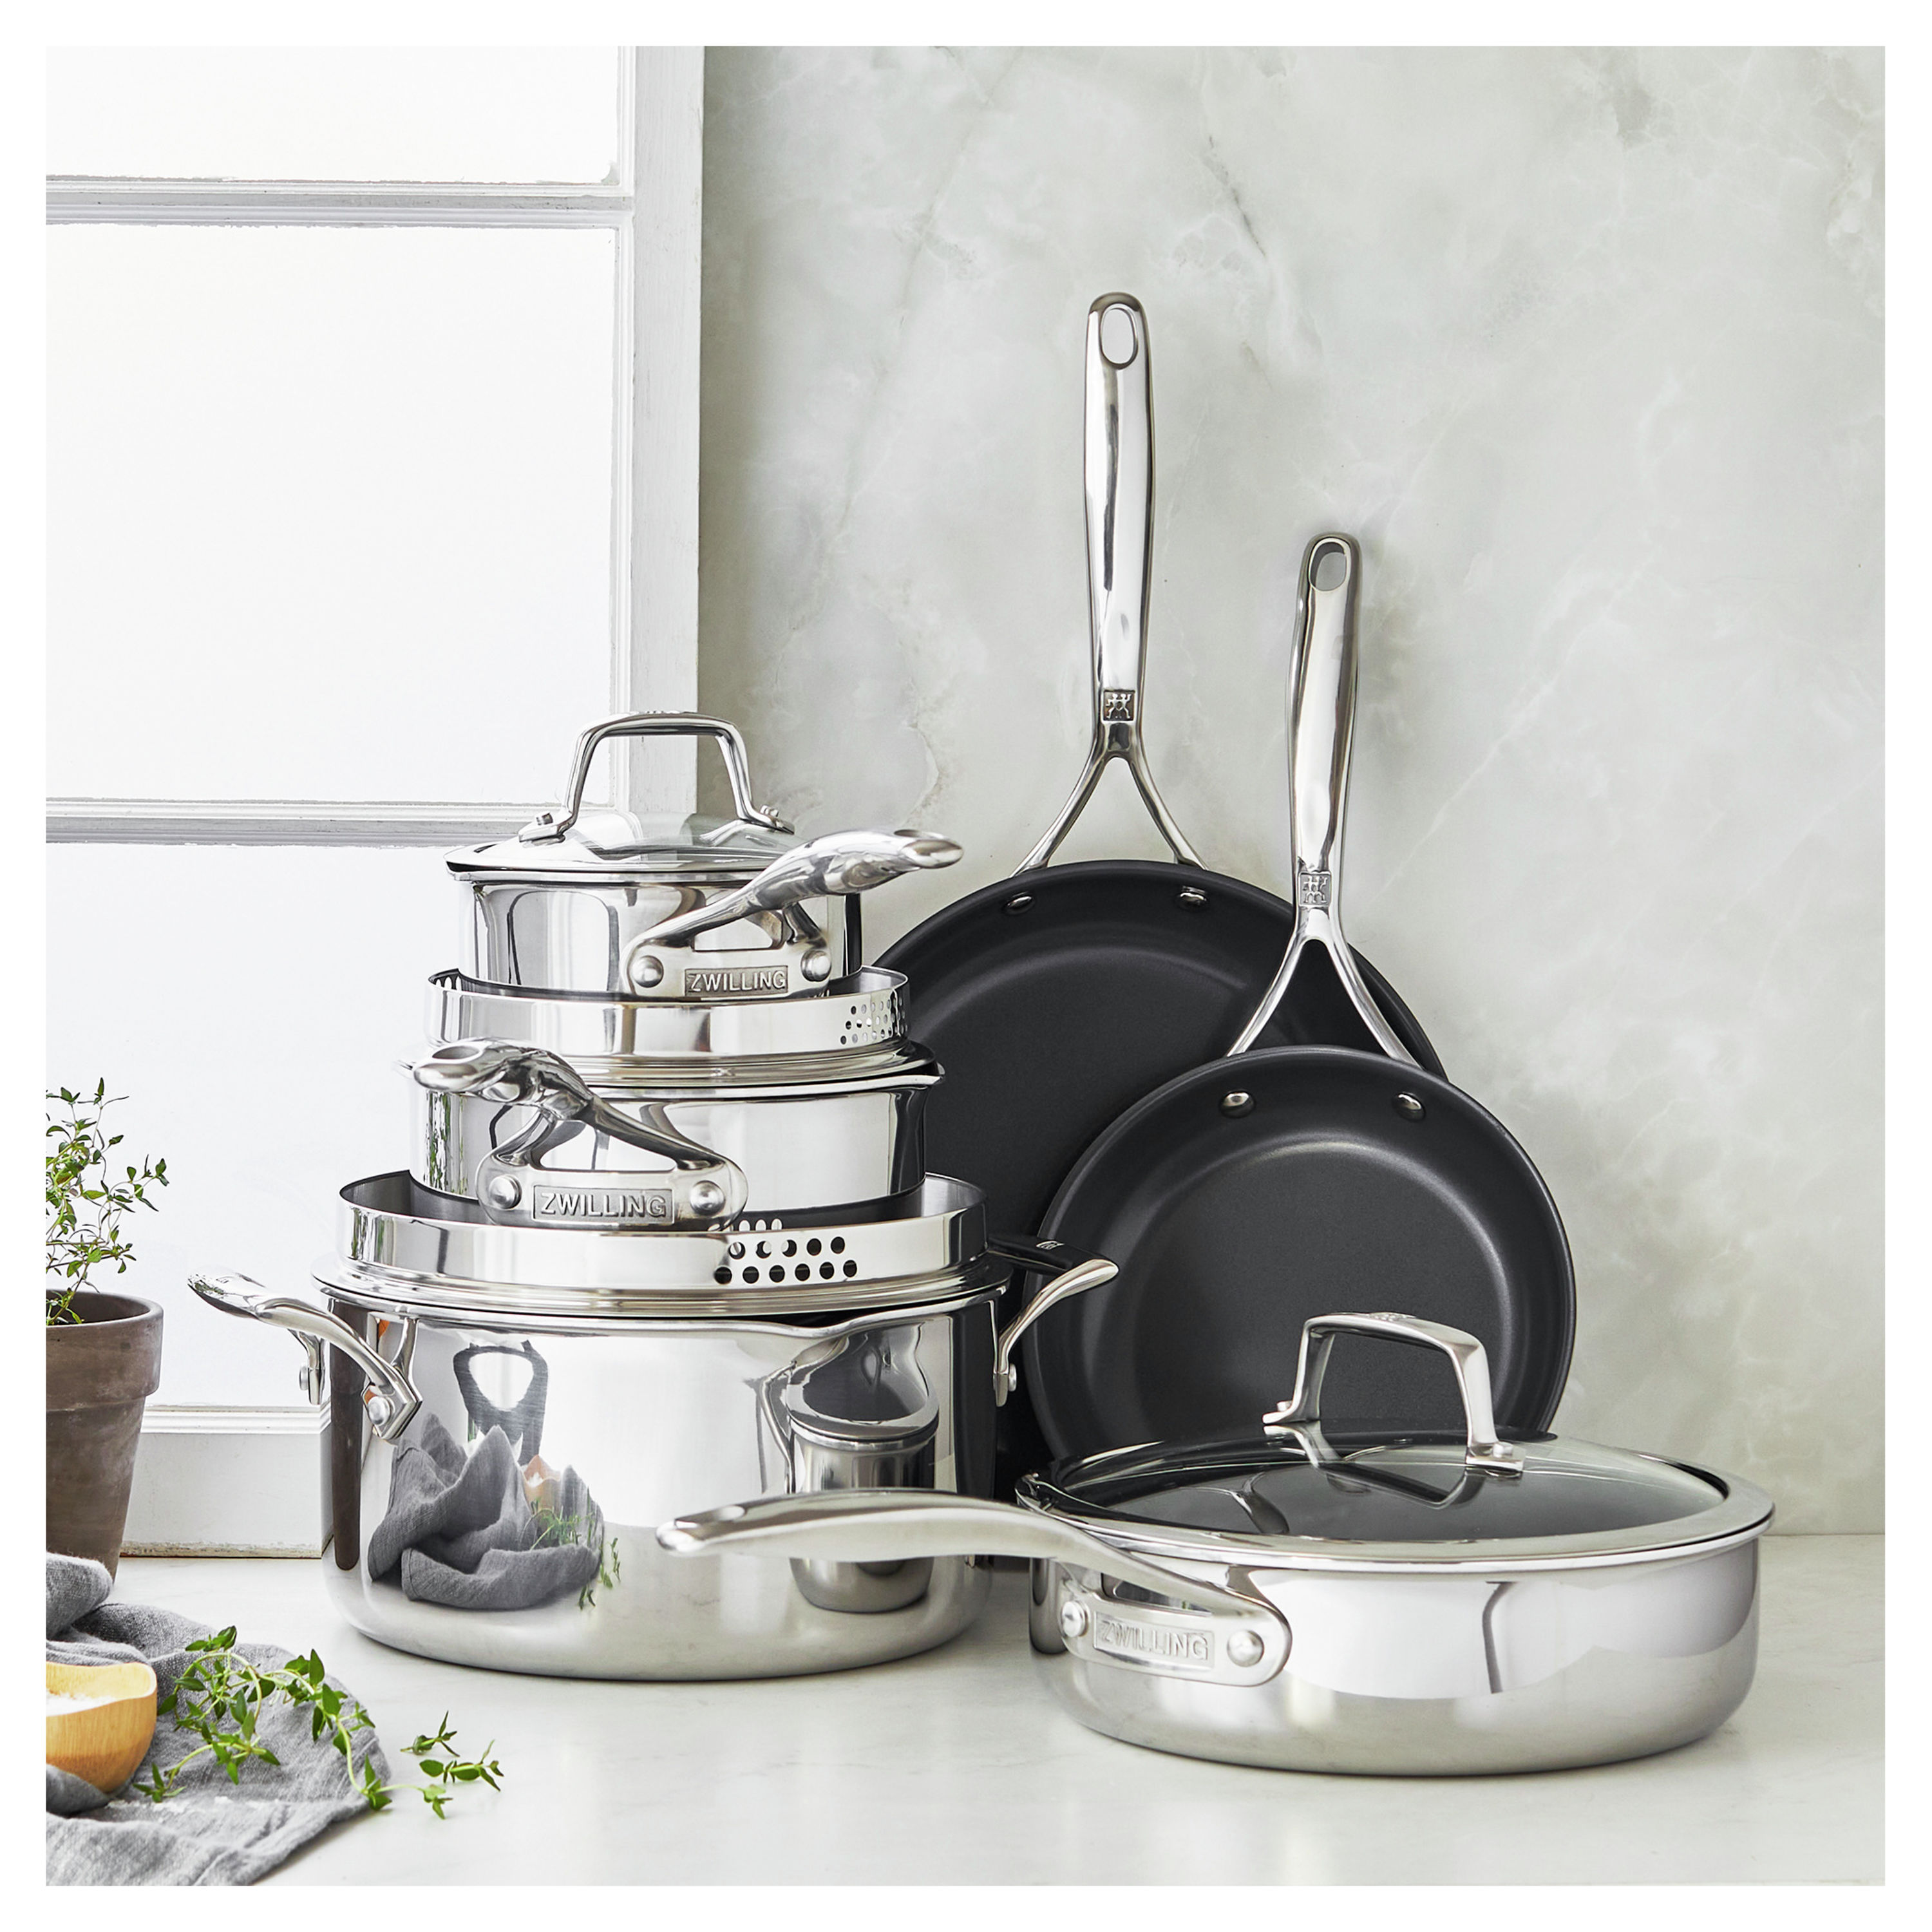 Buy ZWILLING Energy Plus Pots and pans set